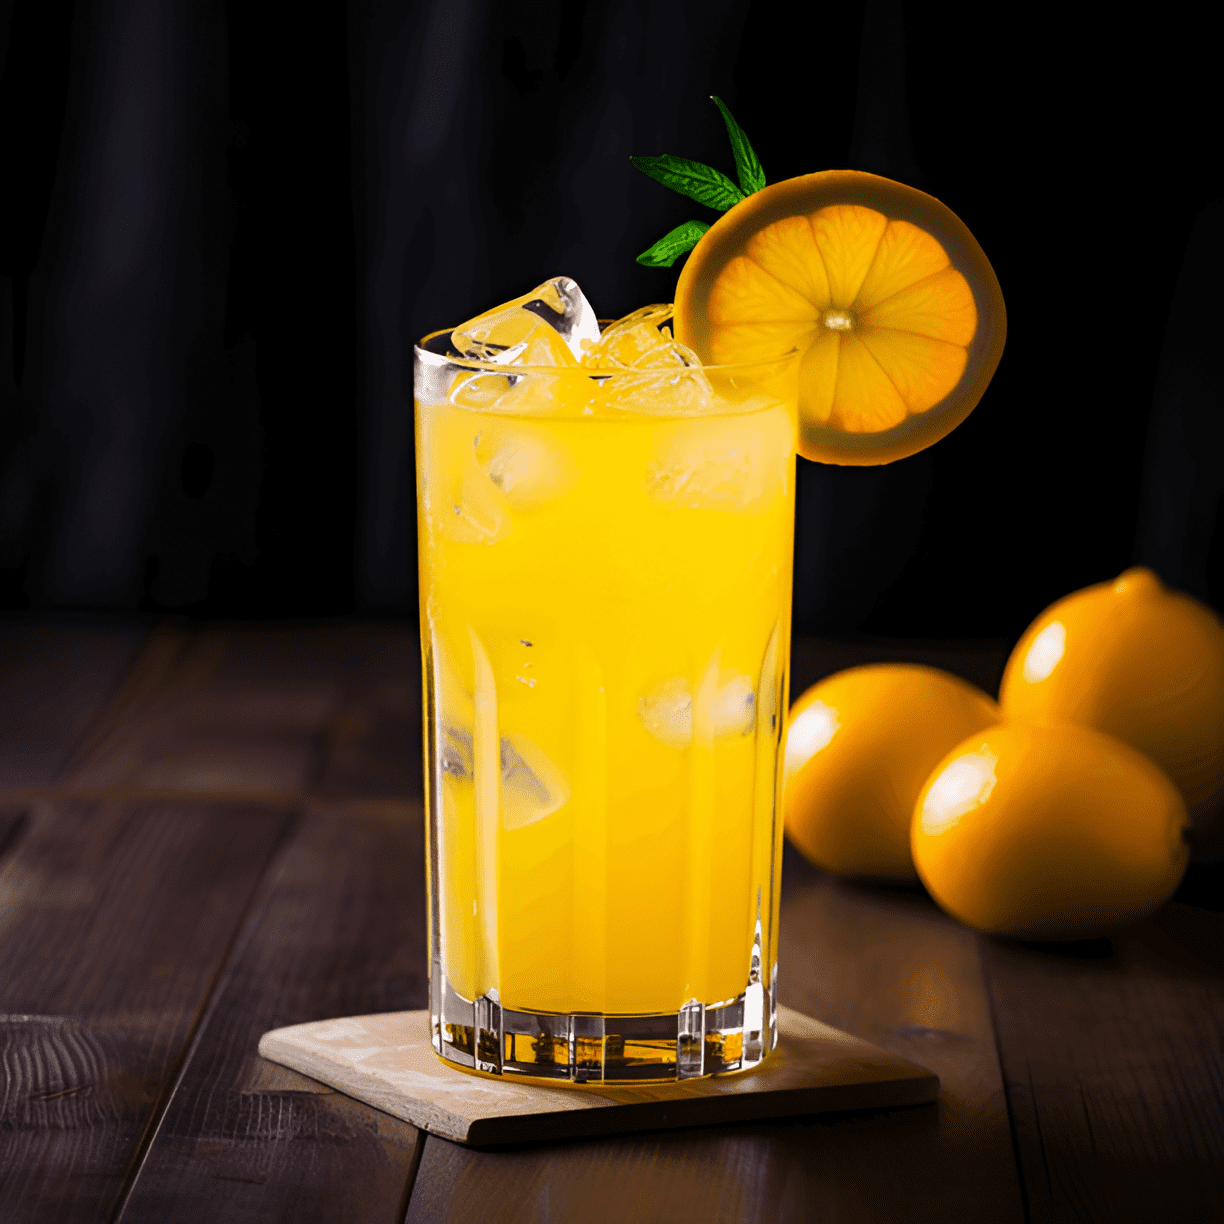 The Screwdriver cocktail offers a bright, citrusy, and slightly sweet flavor profile. The smoothness of the vodka is complemented by the tangy and refreshing taste of the orange juice, making it a well-balanced and easy-to-drink cocktail.